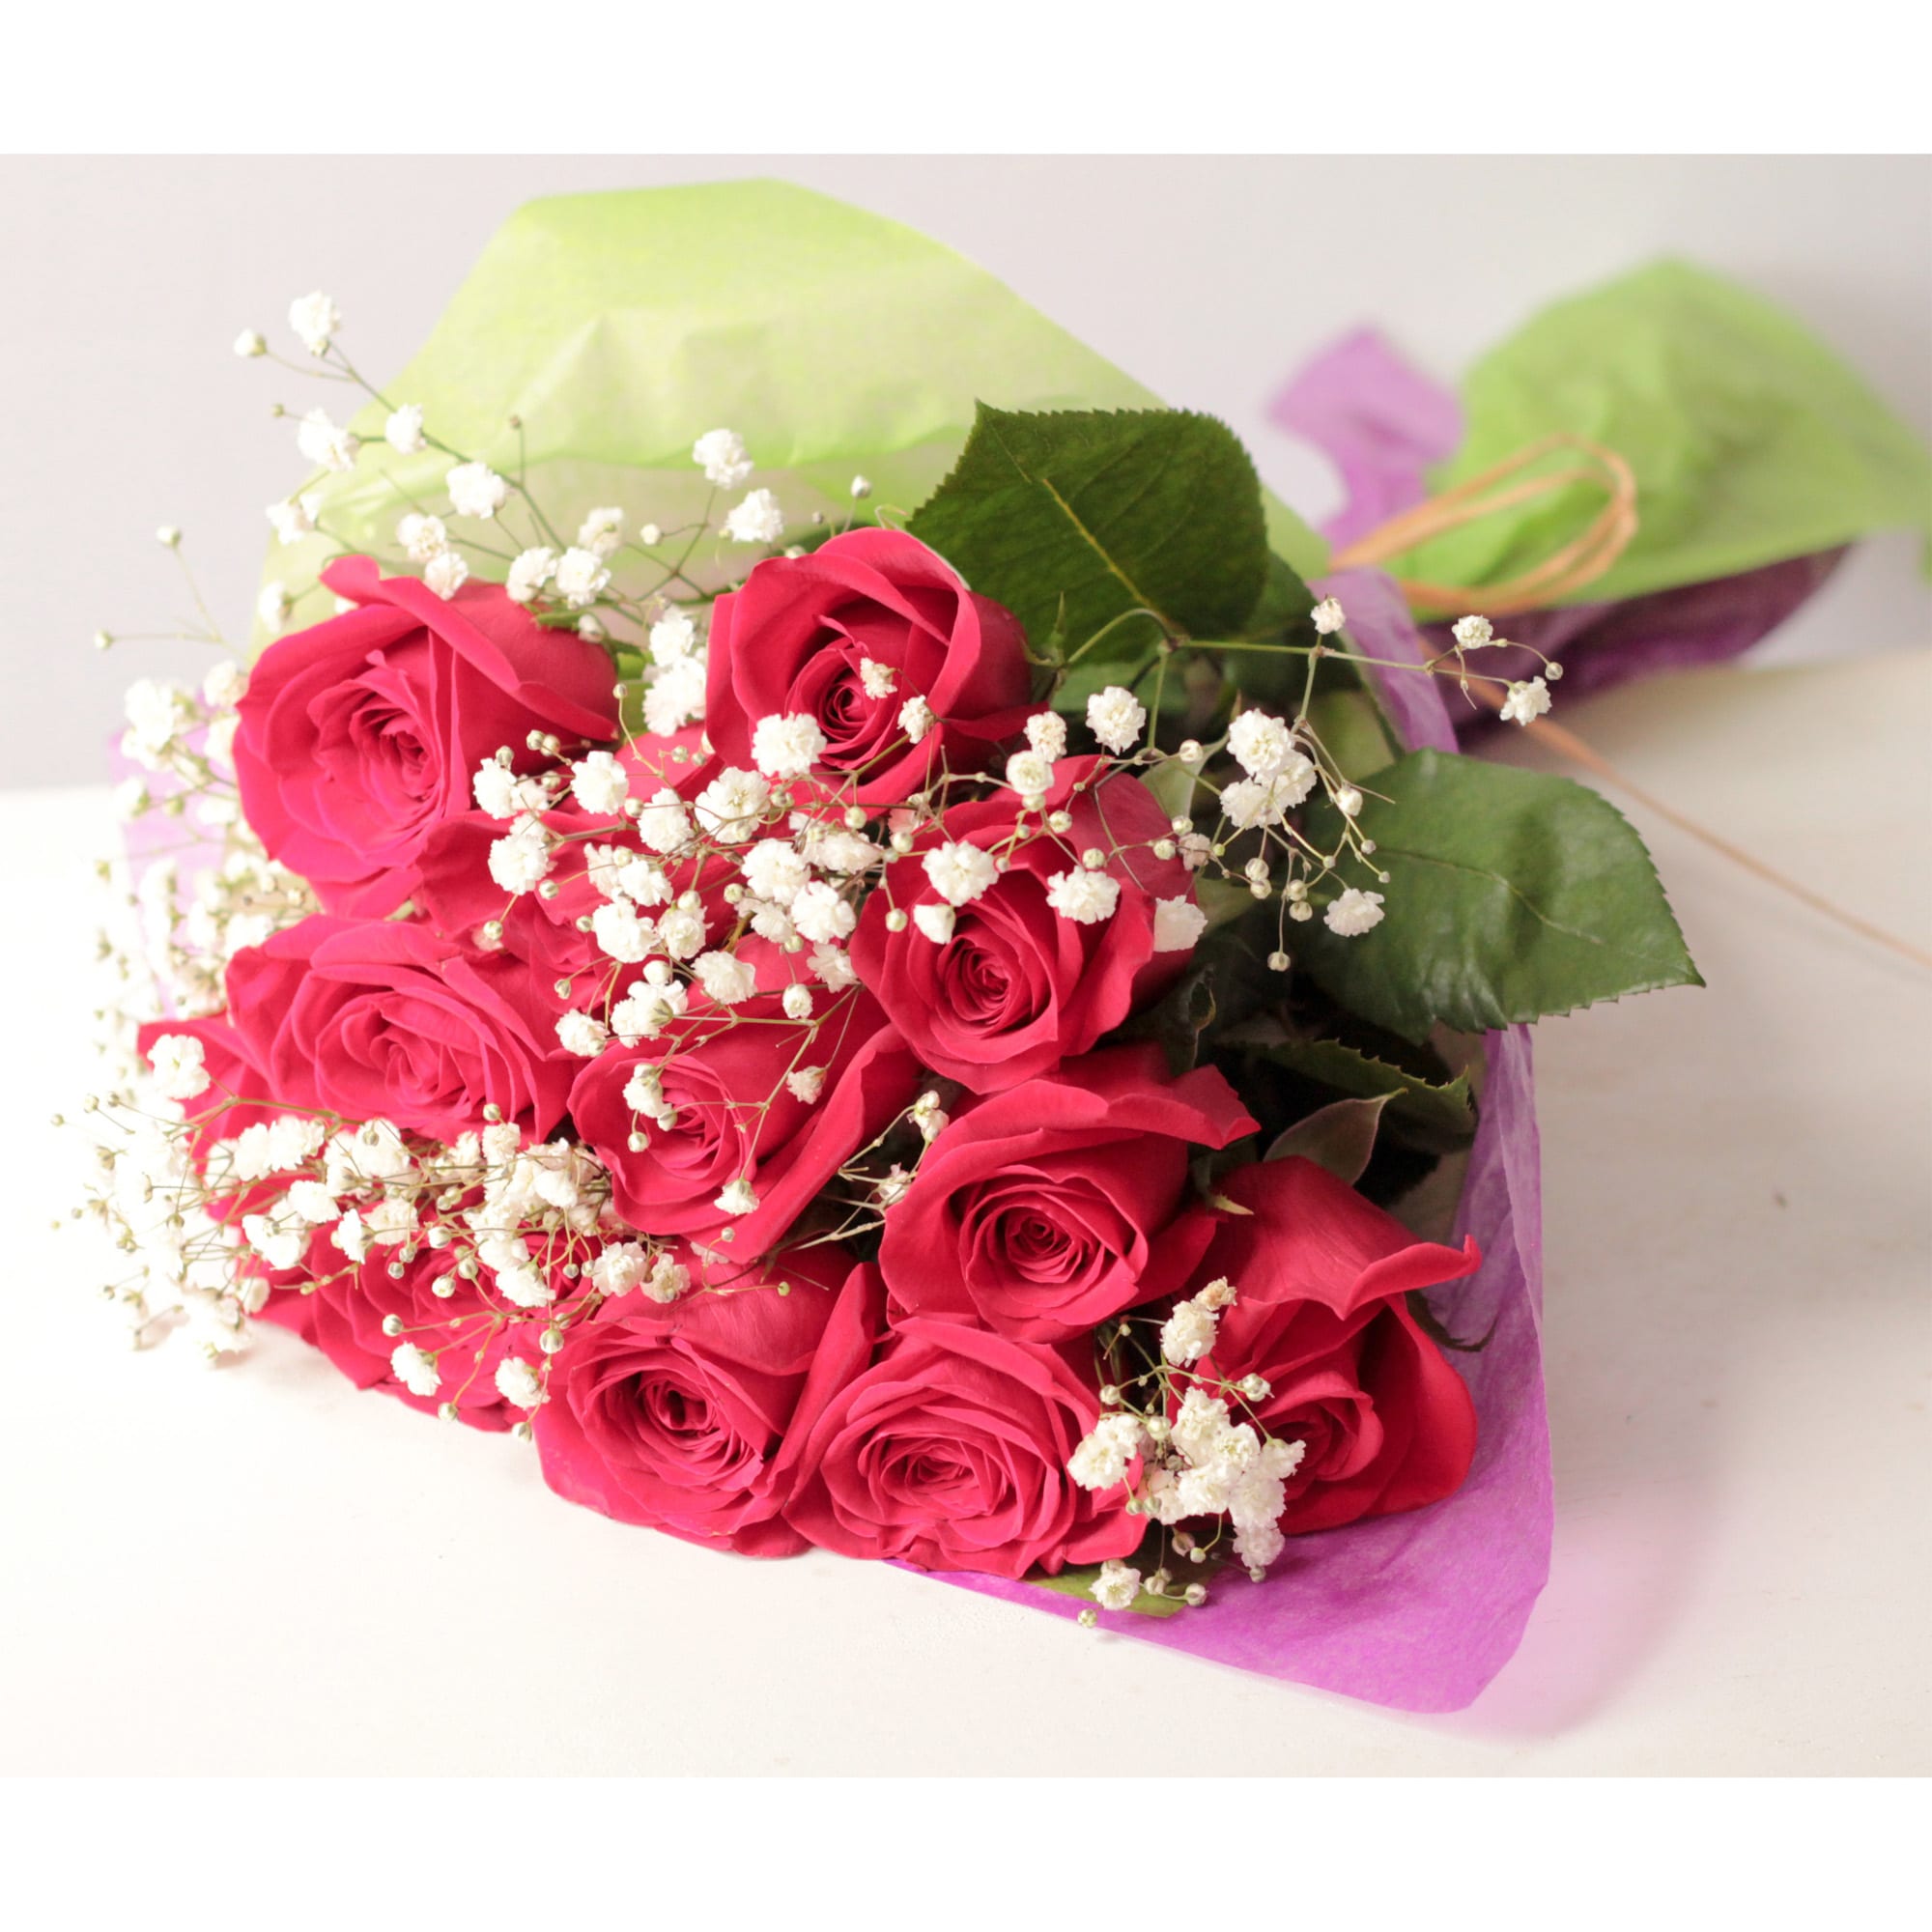 Babies Breath - Flower Delivery - You Floral